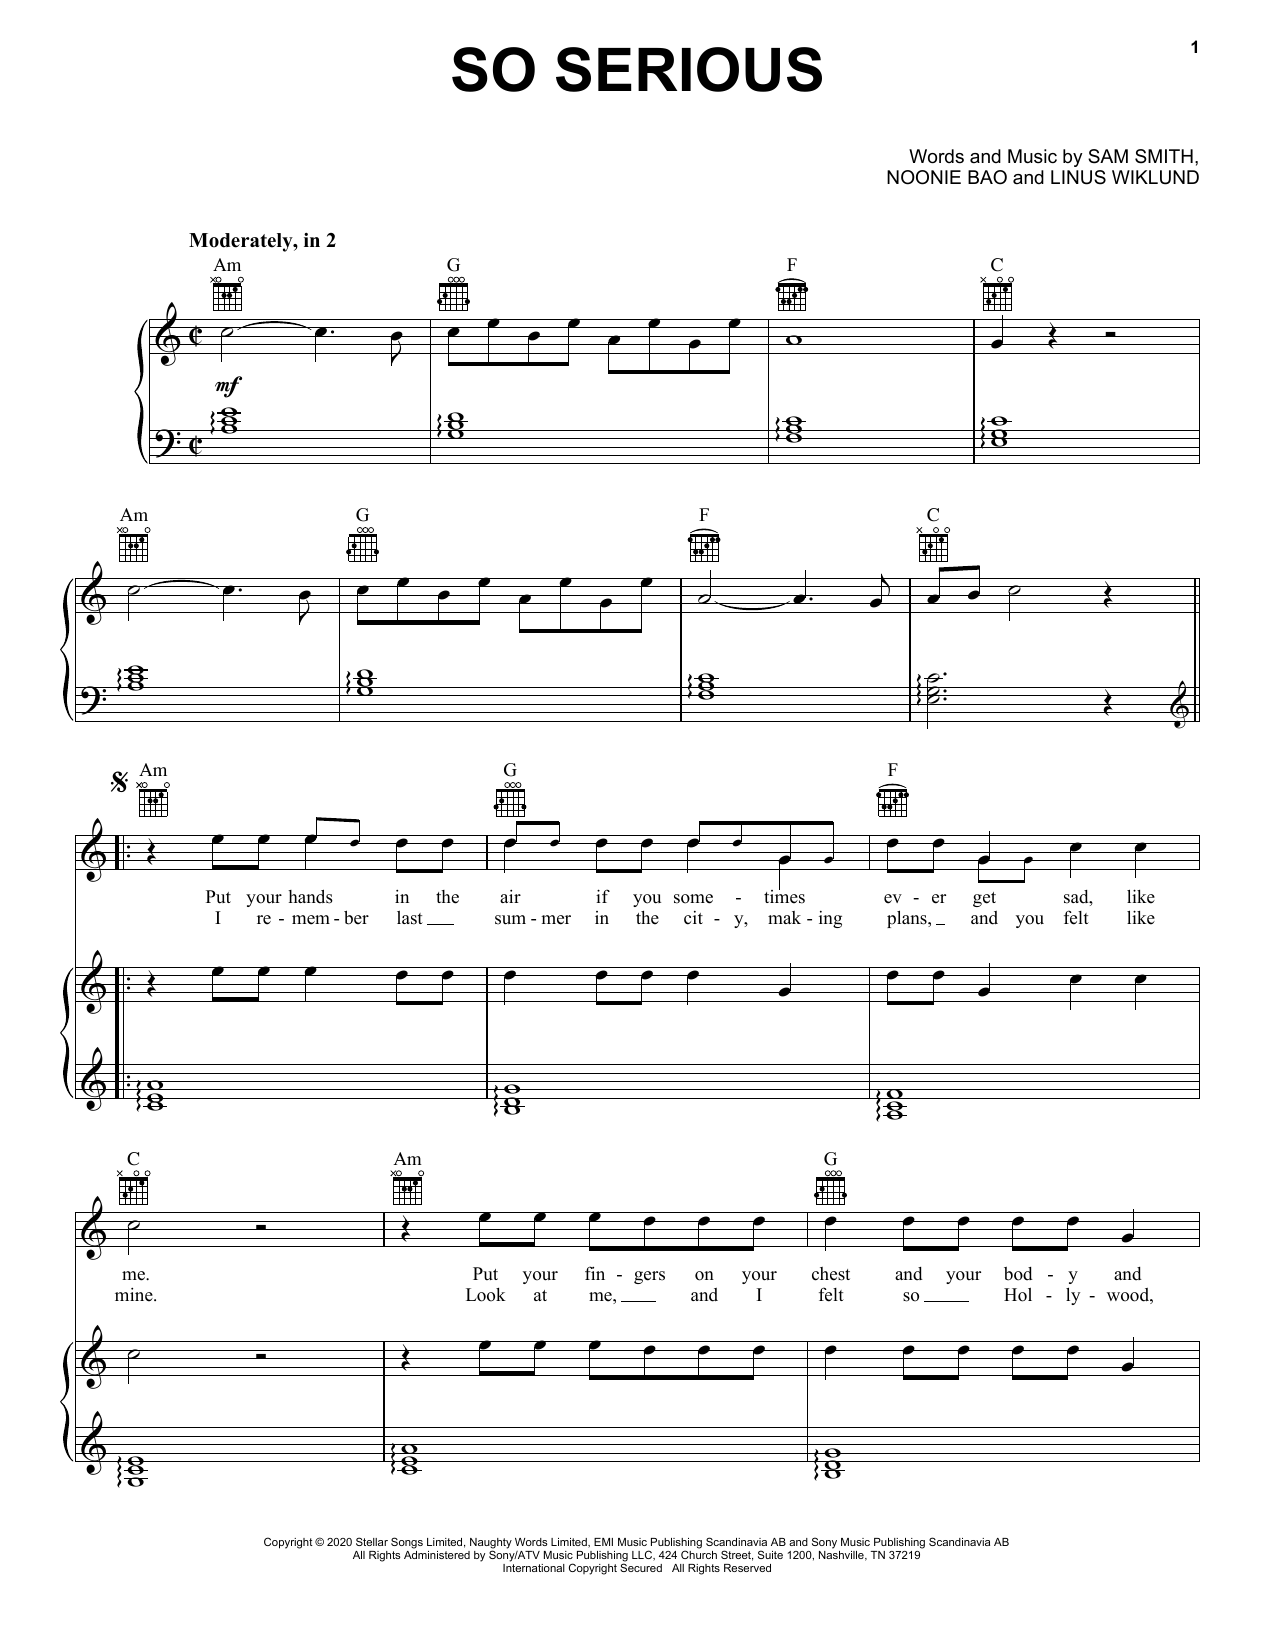 Download Sam Smith So Serious Sheet Music